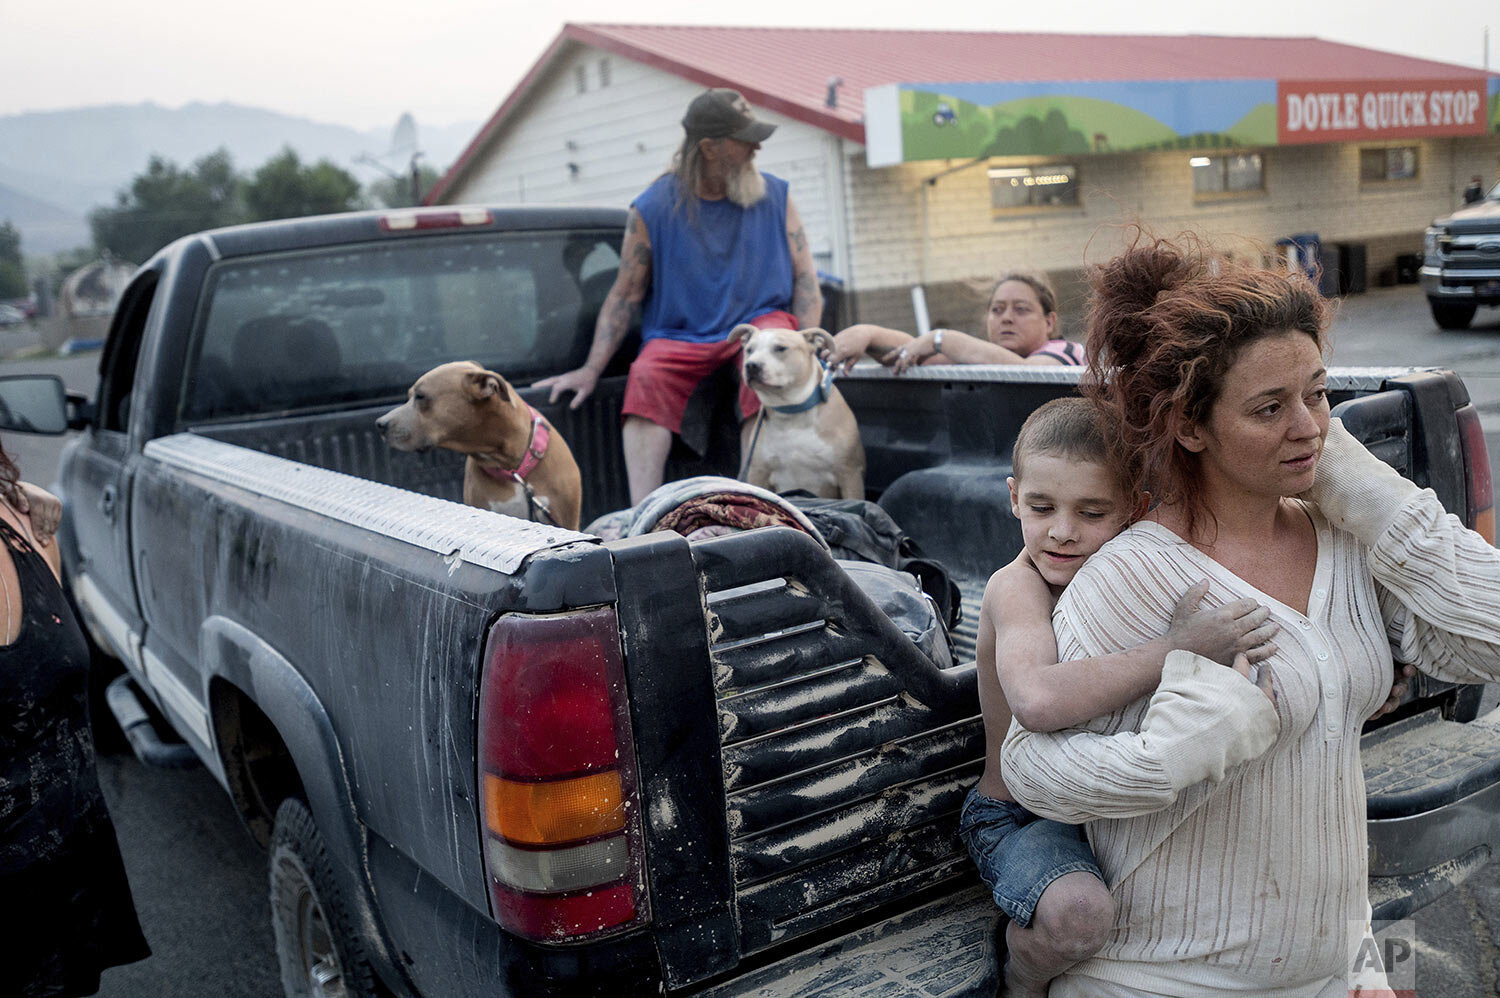  Destiney Barnard holds Raymond William Goetchius while stranded at a gas station near the Dixie Fire on Tuesday, Aug. 17, 2021, in Doyle, Calif. Barnard was helping Goetchius and his family evacuate from Susanville when her car broke down. (AP Photo